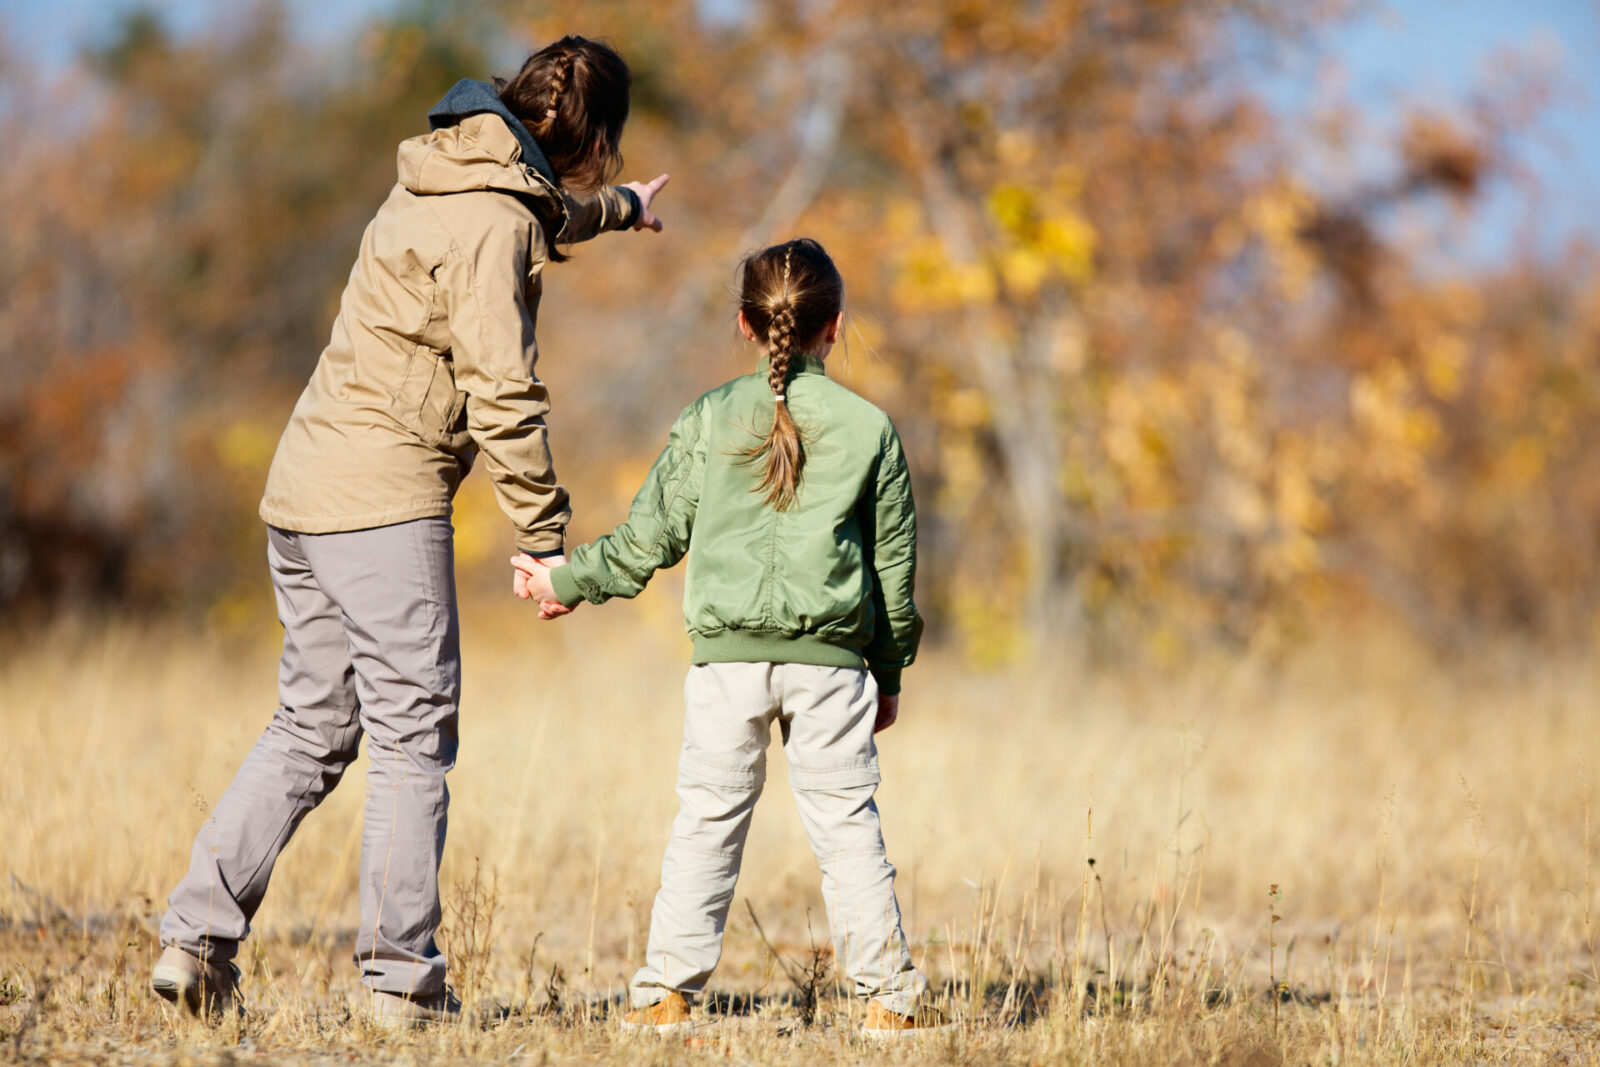 The wilderness affords a never ending learning opportunity - one of the reasons to embark on eco safaris for kids.